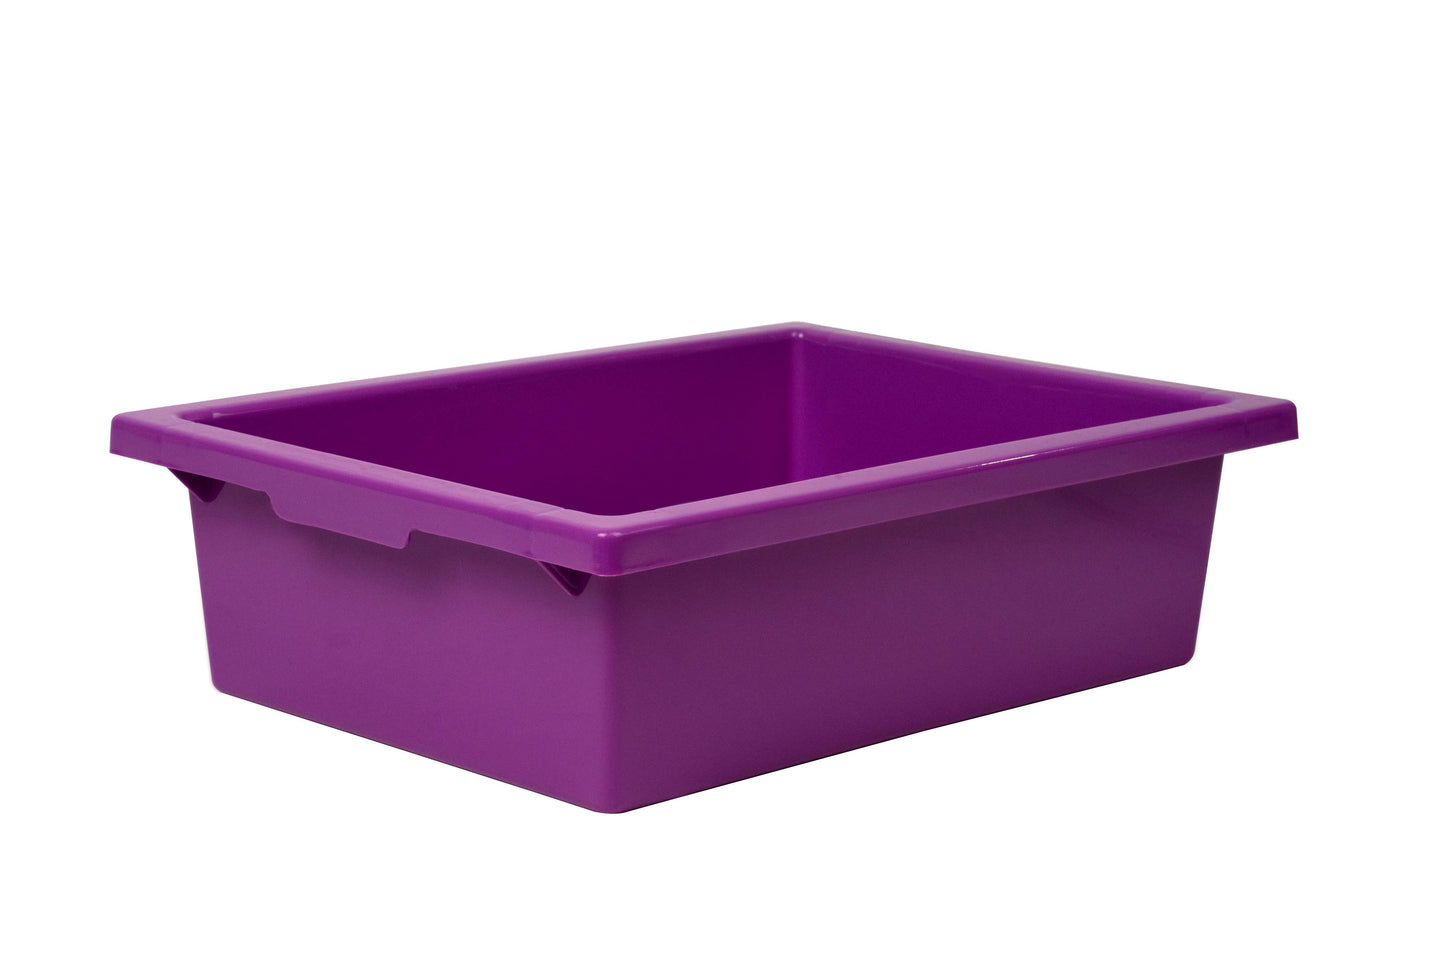 Tote Tray Standard